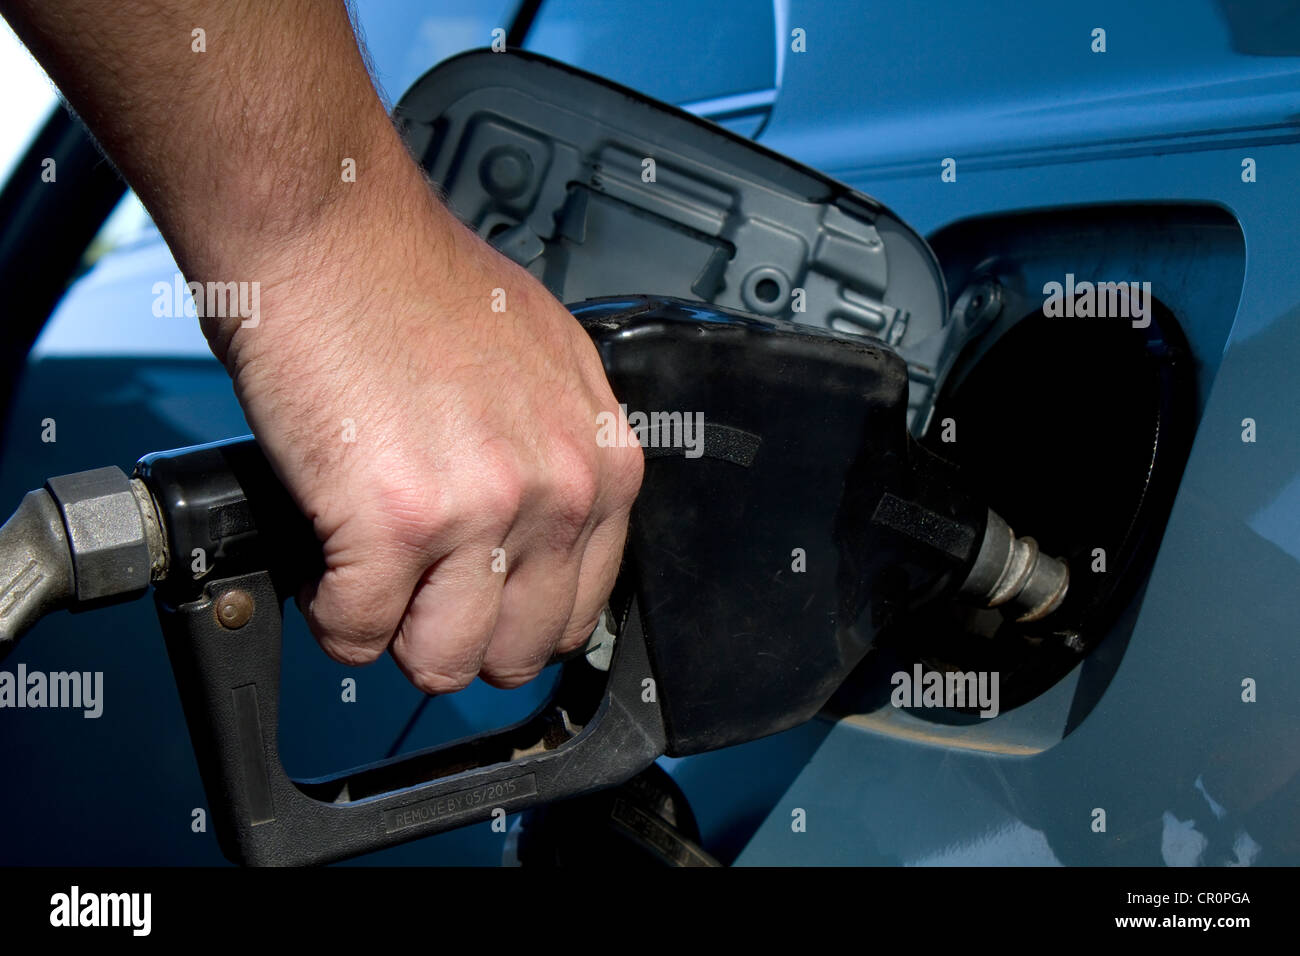 Close up of man hand holding gas pump handle and filling the fuel tank on his vehicle. Stock Photo